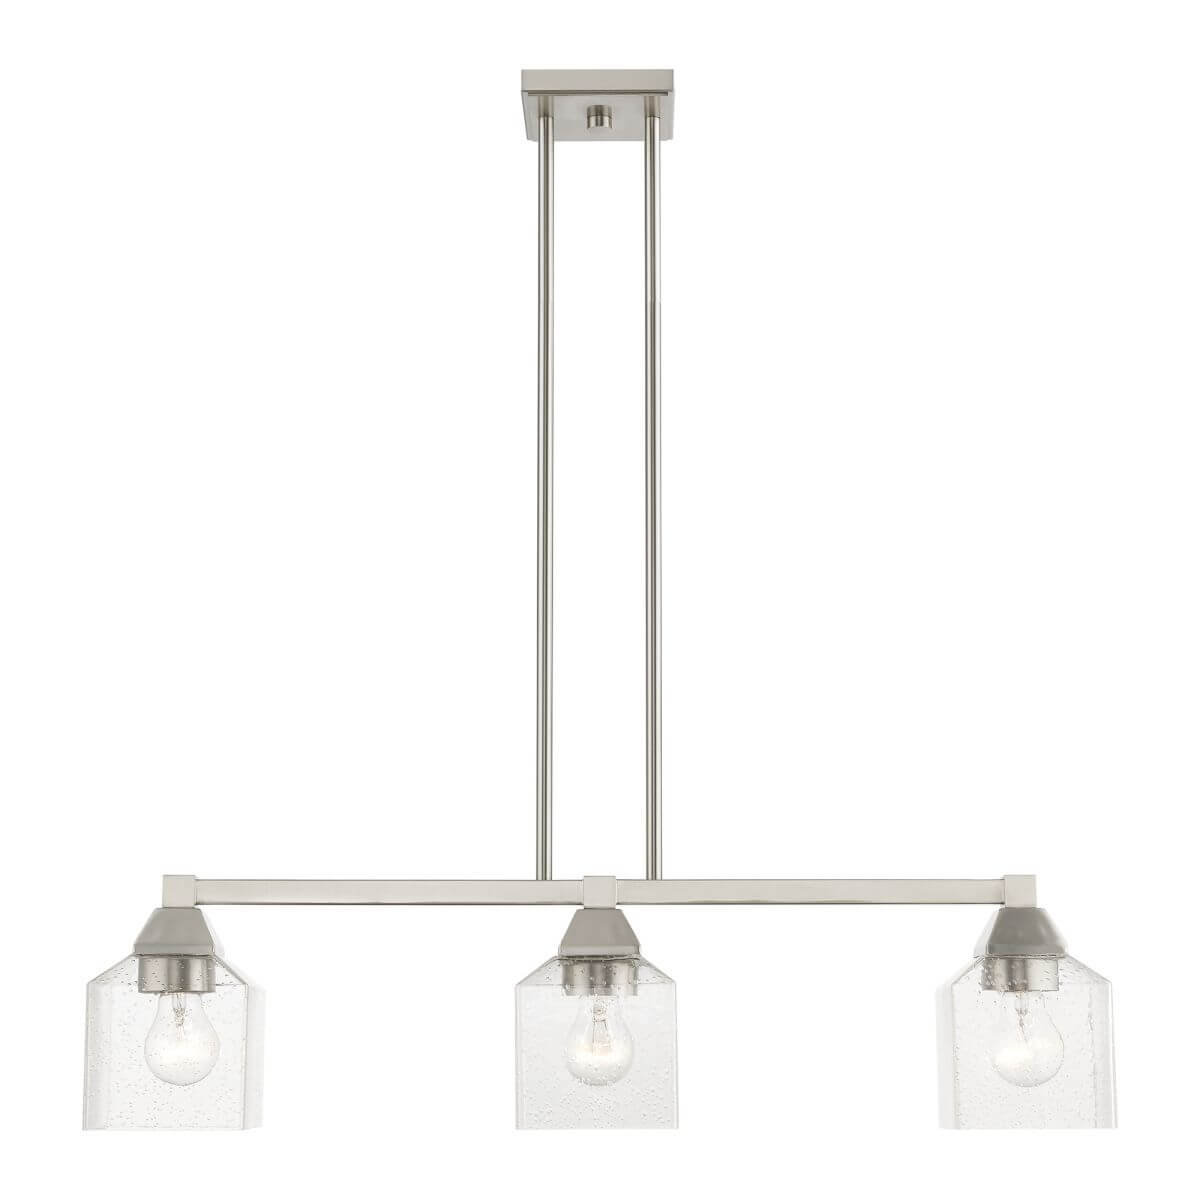 Livex 49763-91 Aragon 3 Light 30 inch Linear Light in Brushed Nickel with Clear Seeded Glass